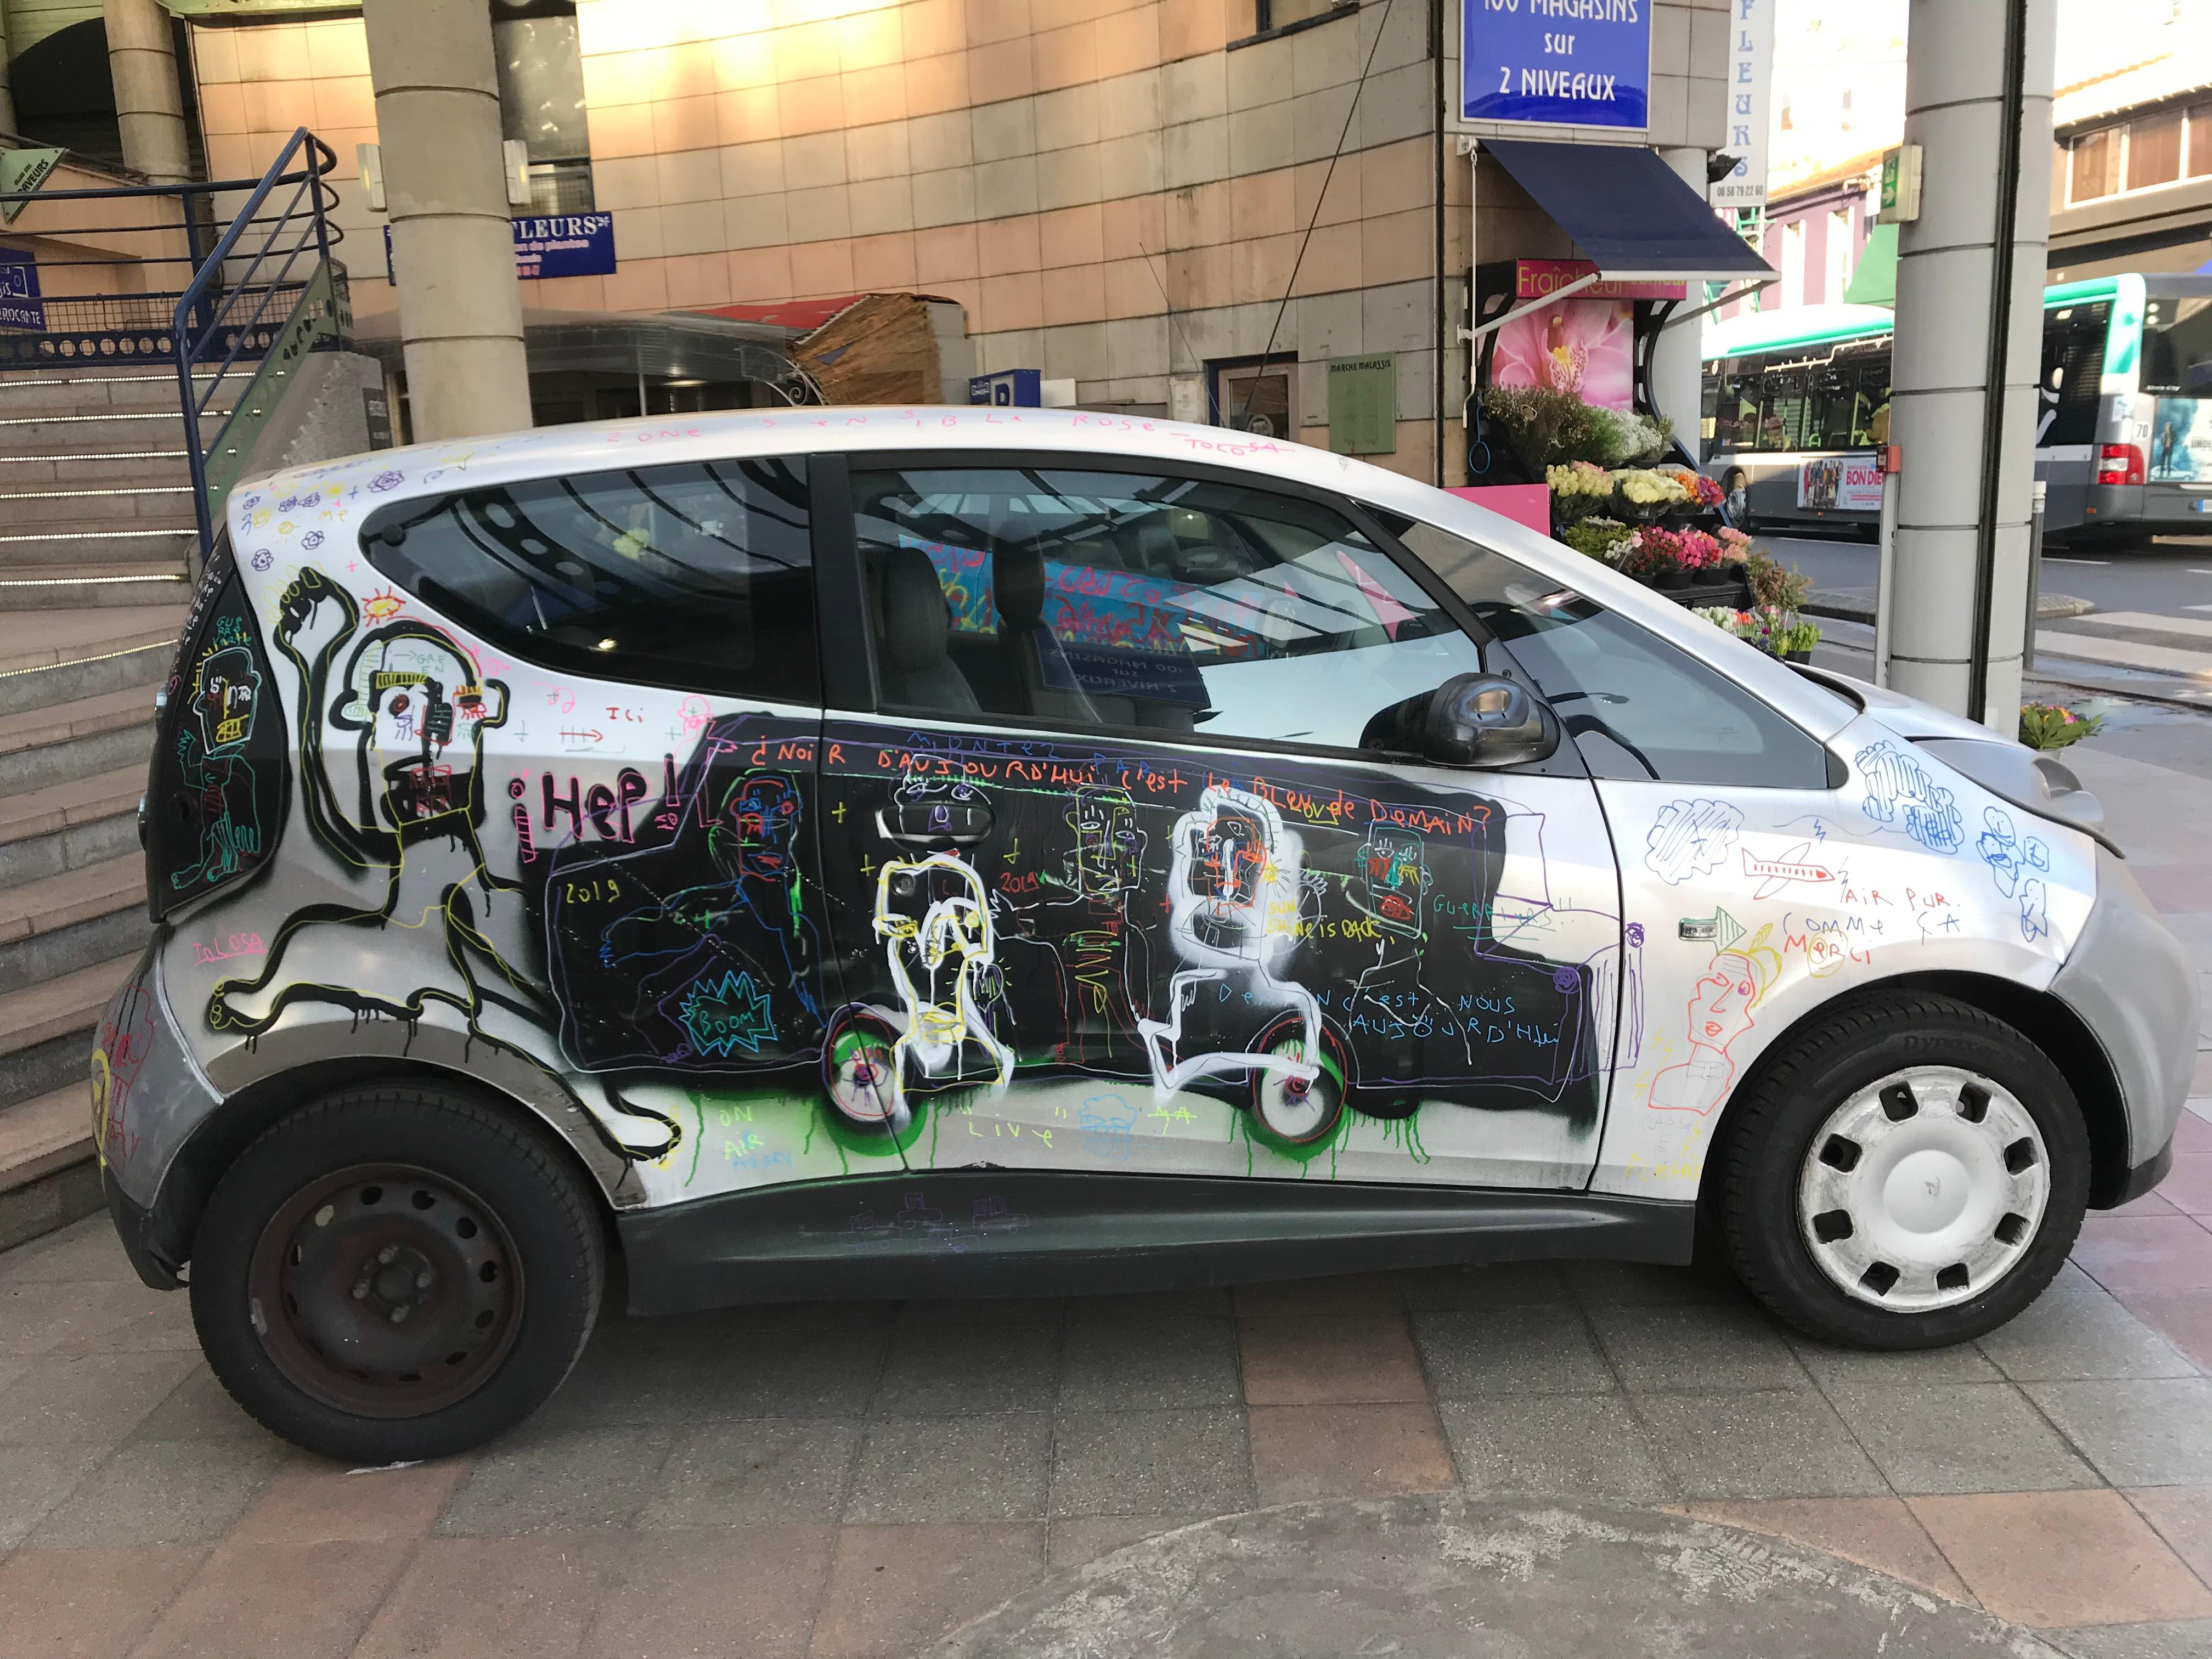 Jazzu, recognized street artist, has completely revamped an autolib during a live performance on Saturday, January 19 and Sunday, January 20 at Malassis Flea Market. It is visible at the entrance to the Malassis market. He wanted to send a positive